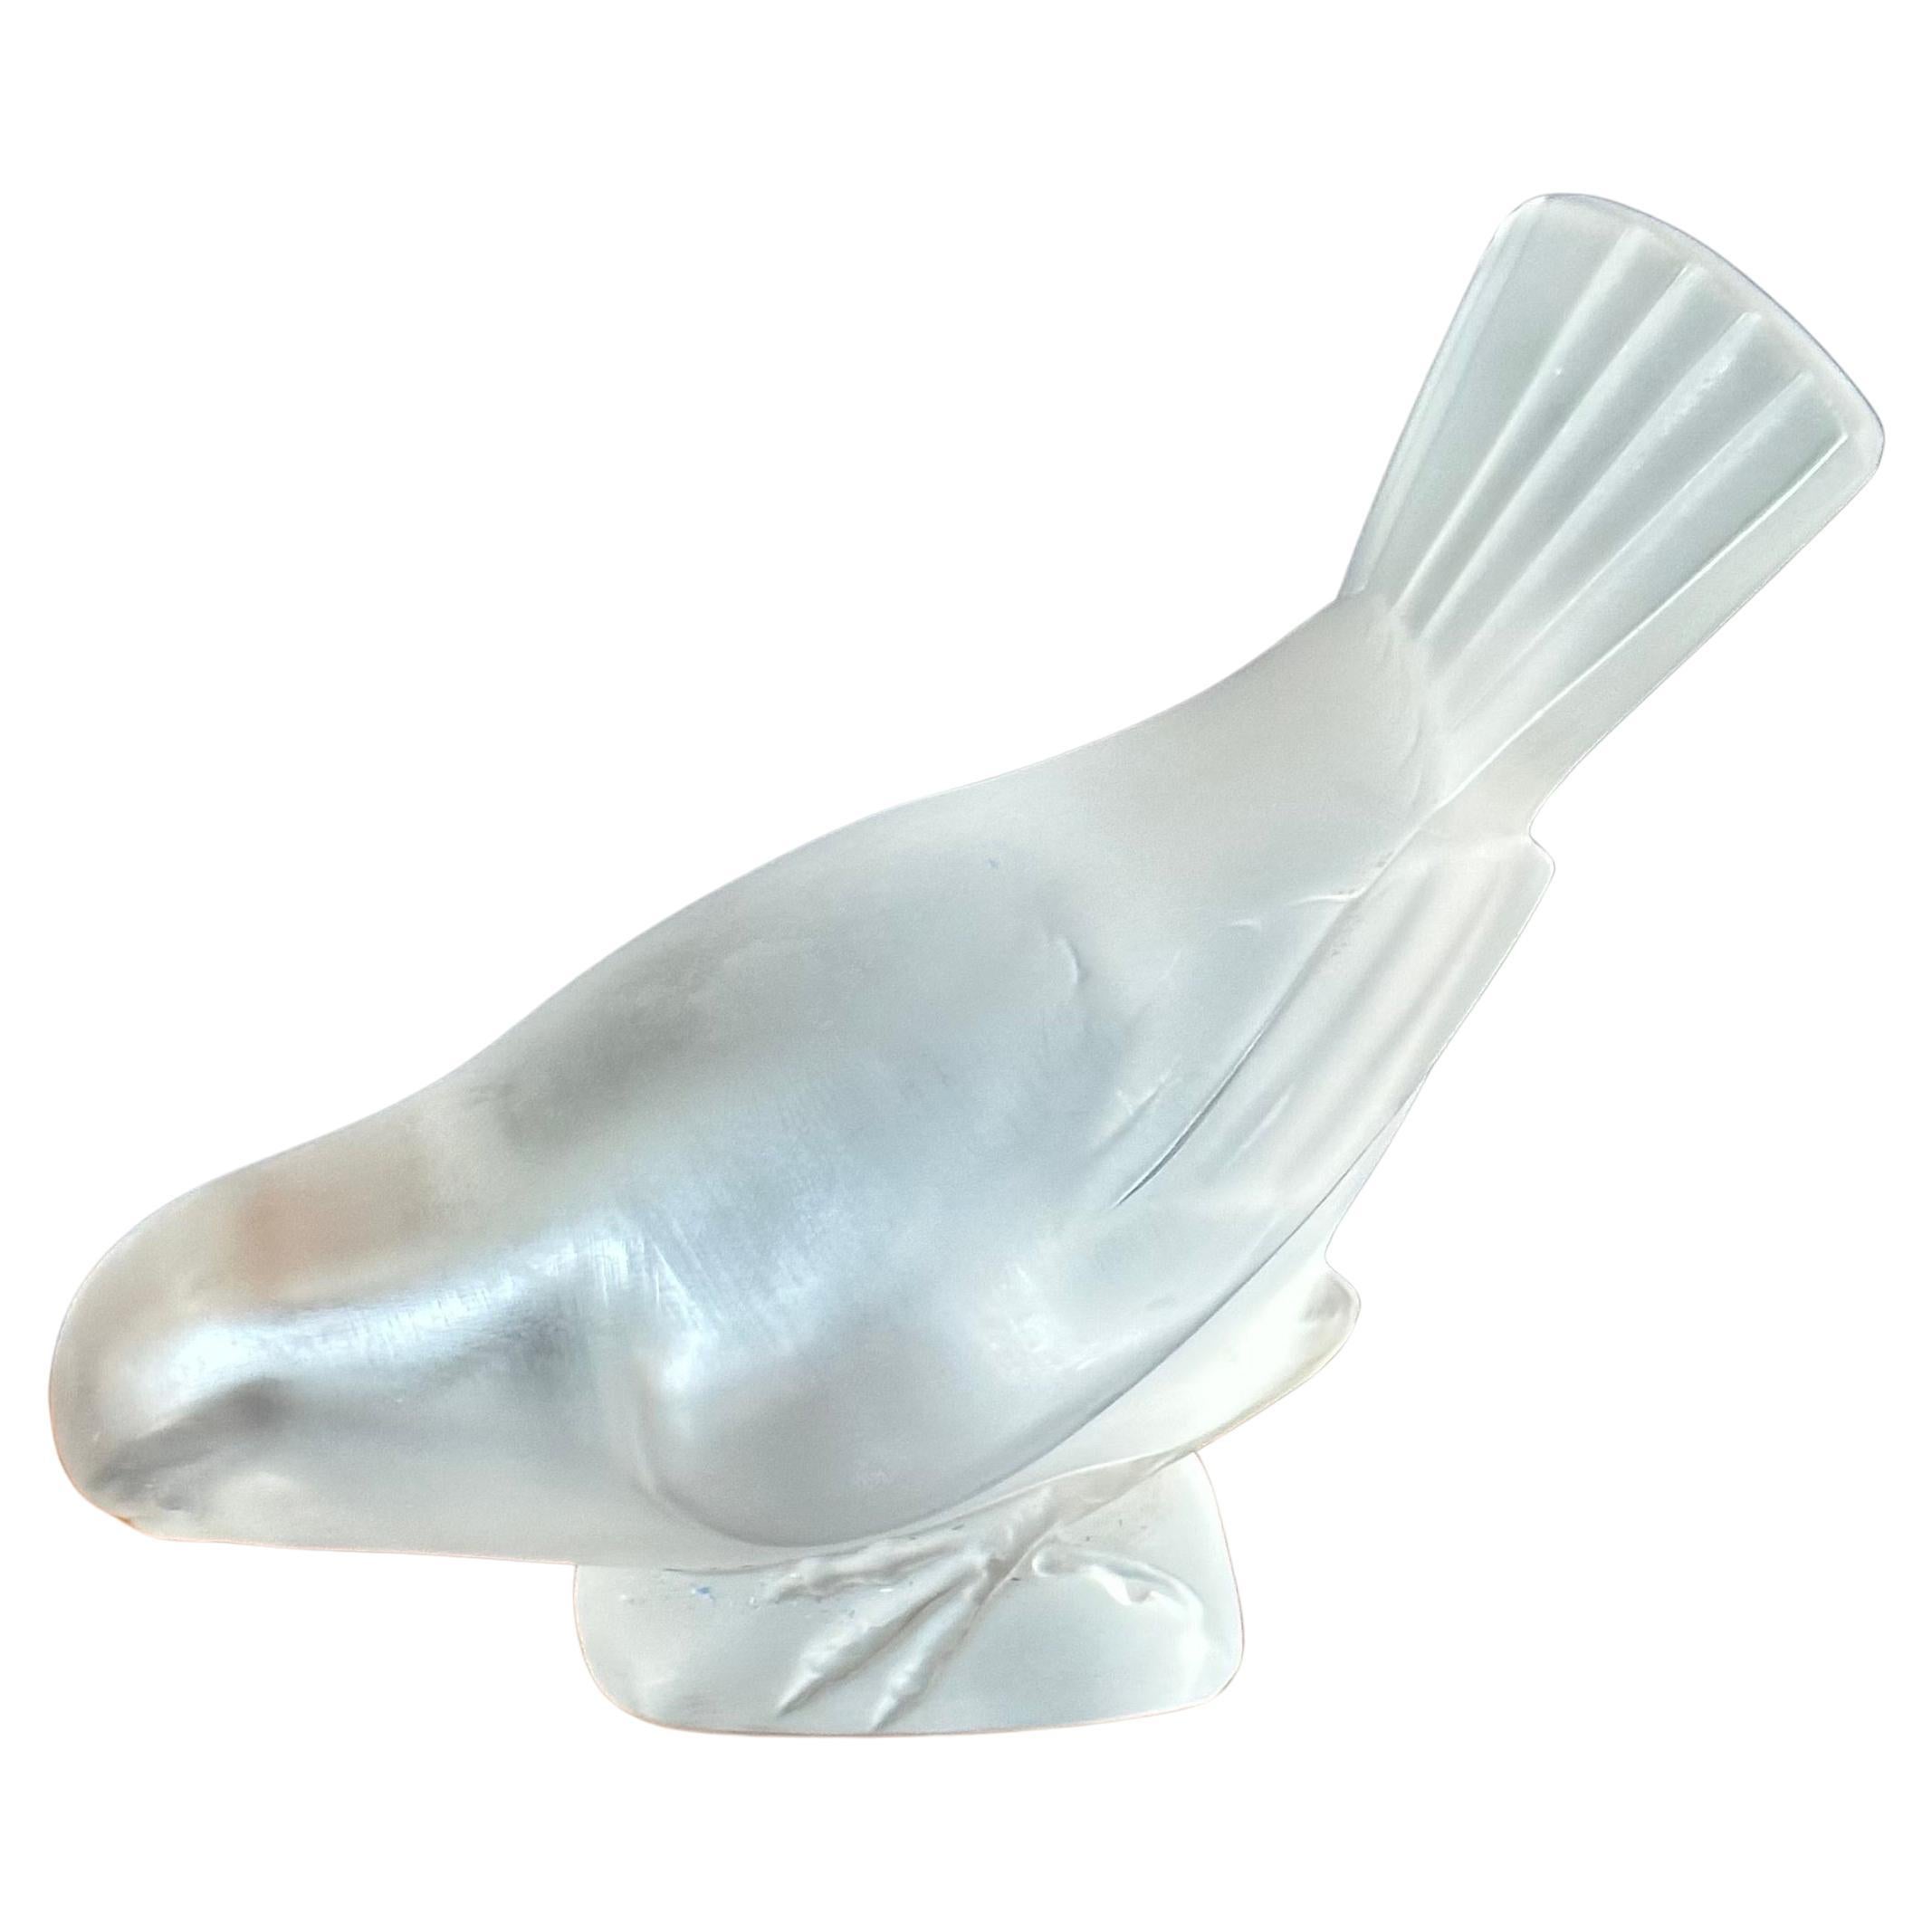 Gorgeous frosted crystal sparrow / bird sculpture by Lalique of France, circa 1980s. The bird is in very good vintage condition with no chips or cracks and measure 5